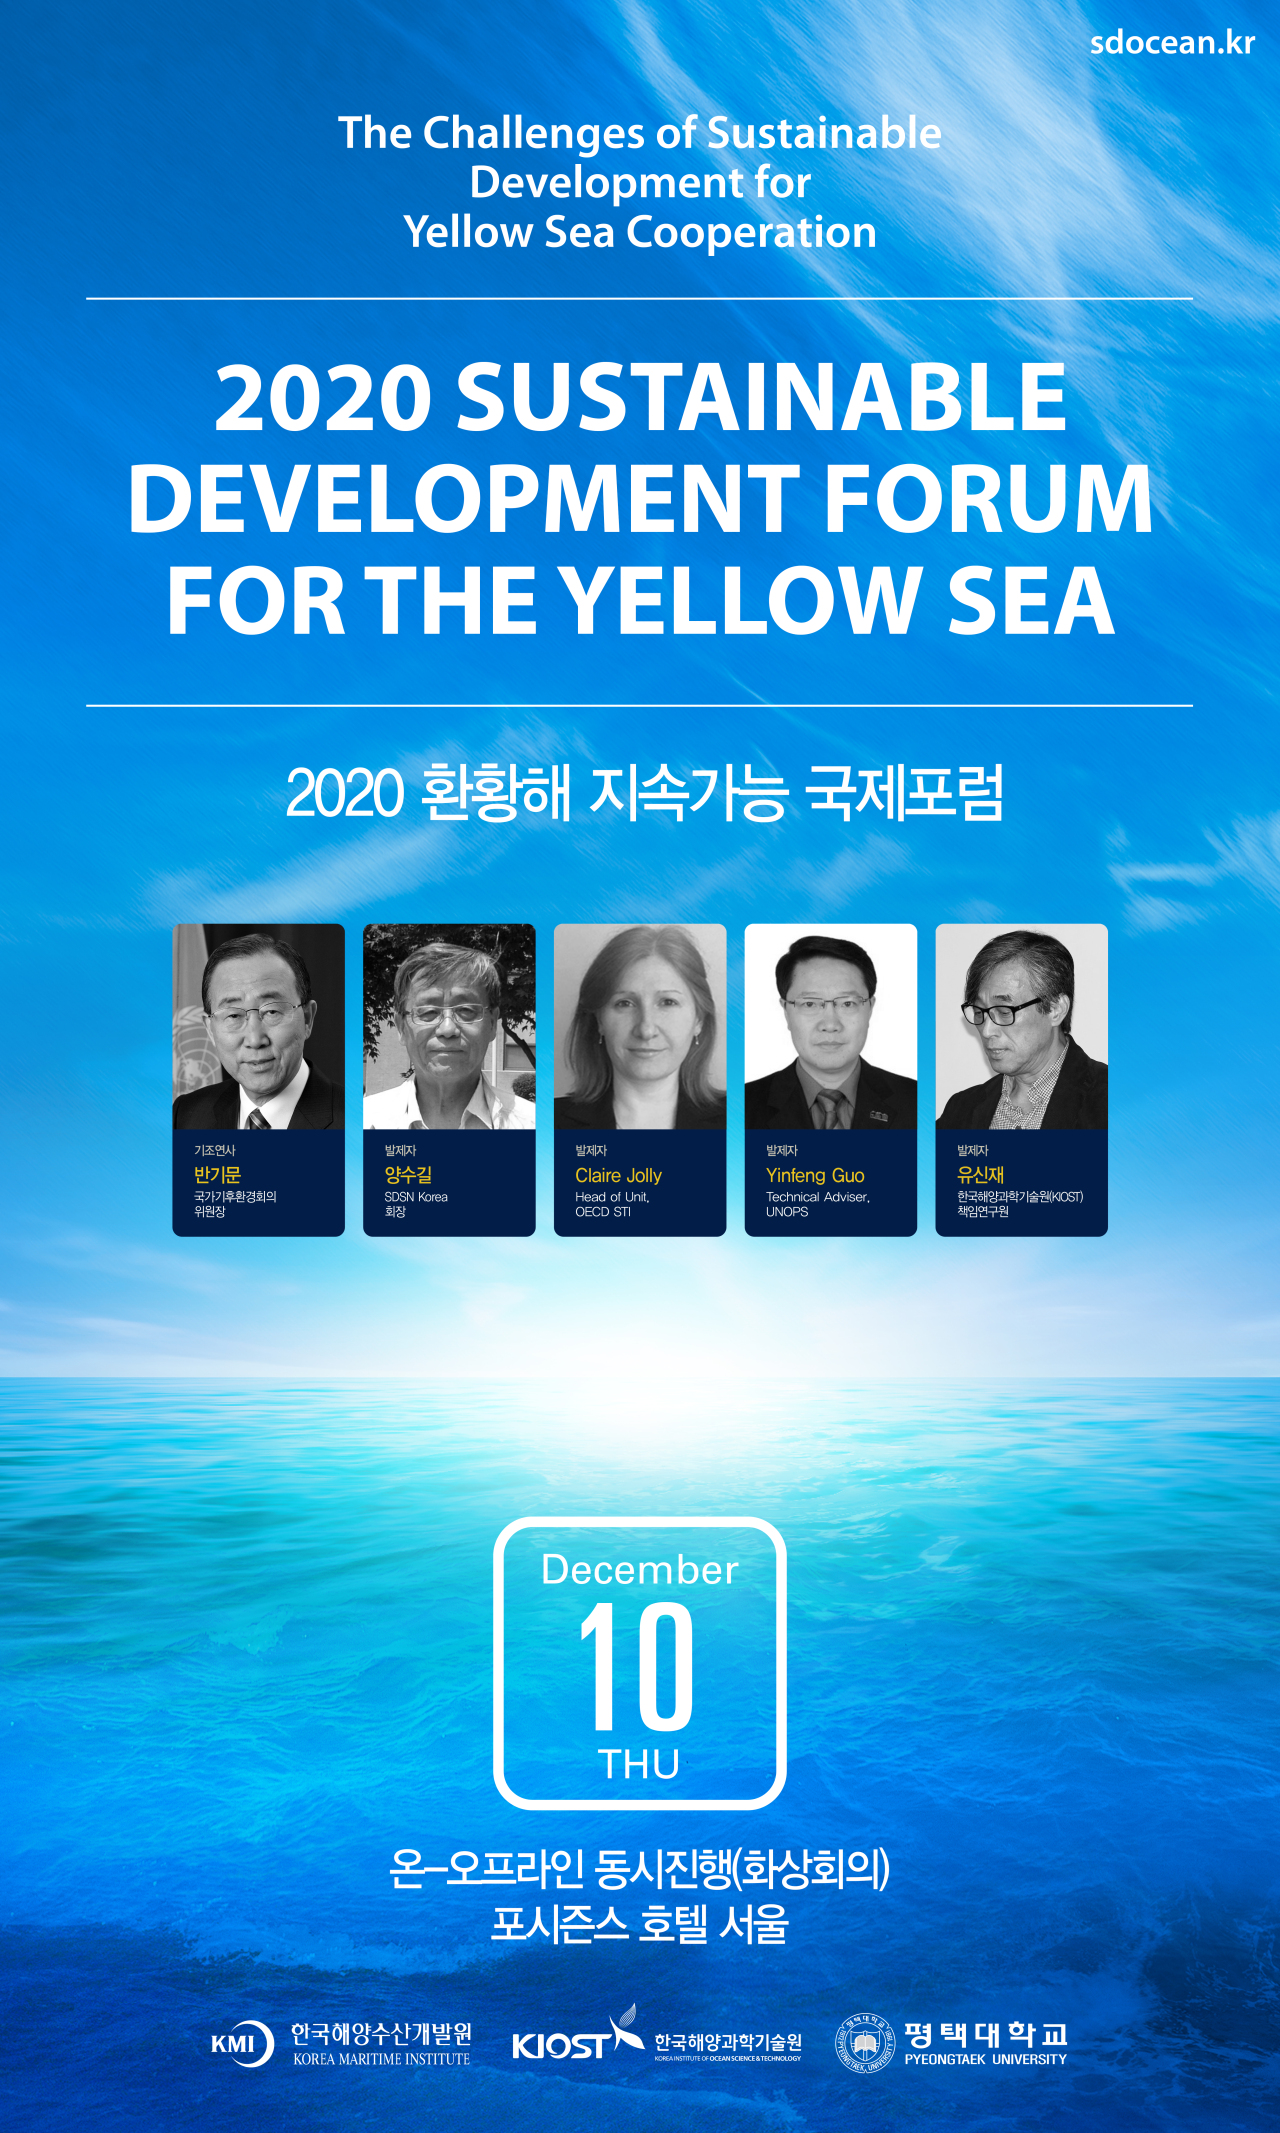 The official poster for the 2020 Sustainable Development Forum for the Yellow Sea